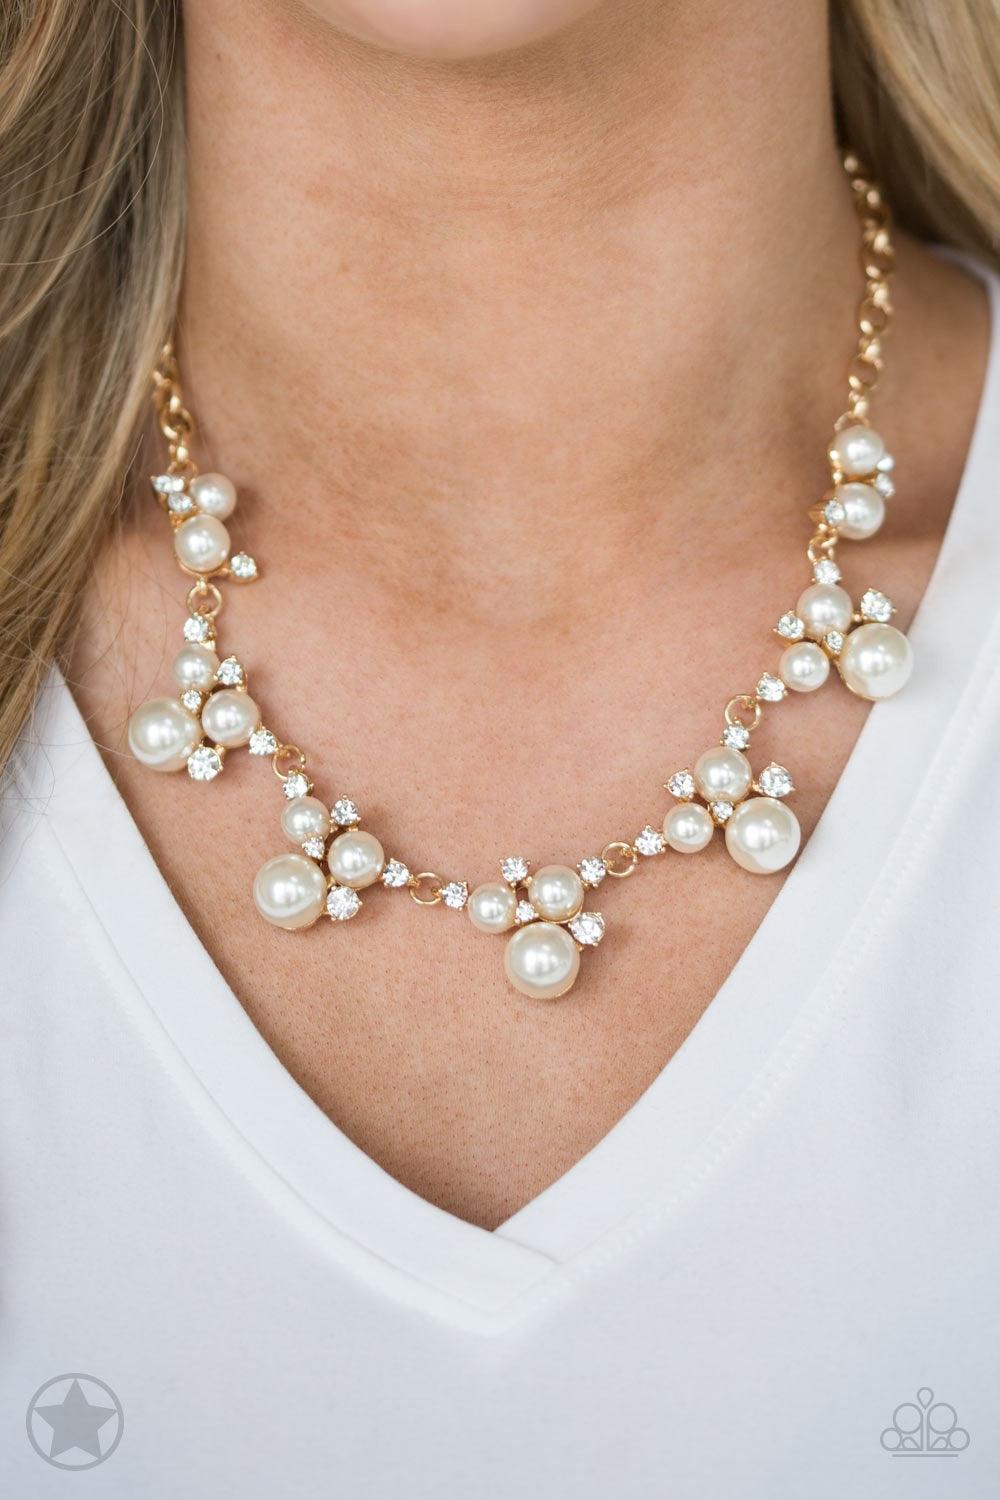 Paparazzi Accessories Toast To Perfection - Gold Clusters of pearls and dazzling white rhinestones join below the collar, creating refined frames. Infused with a glistening gold chain, the sections of luminescent frames trickle along the neck in a timeles